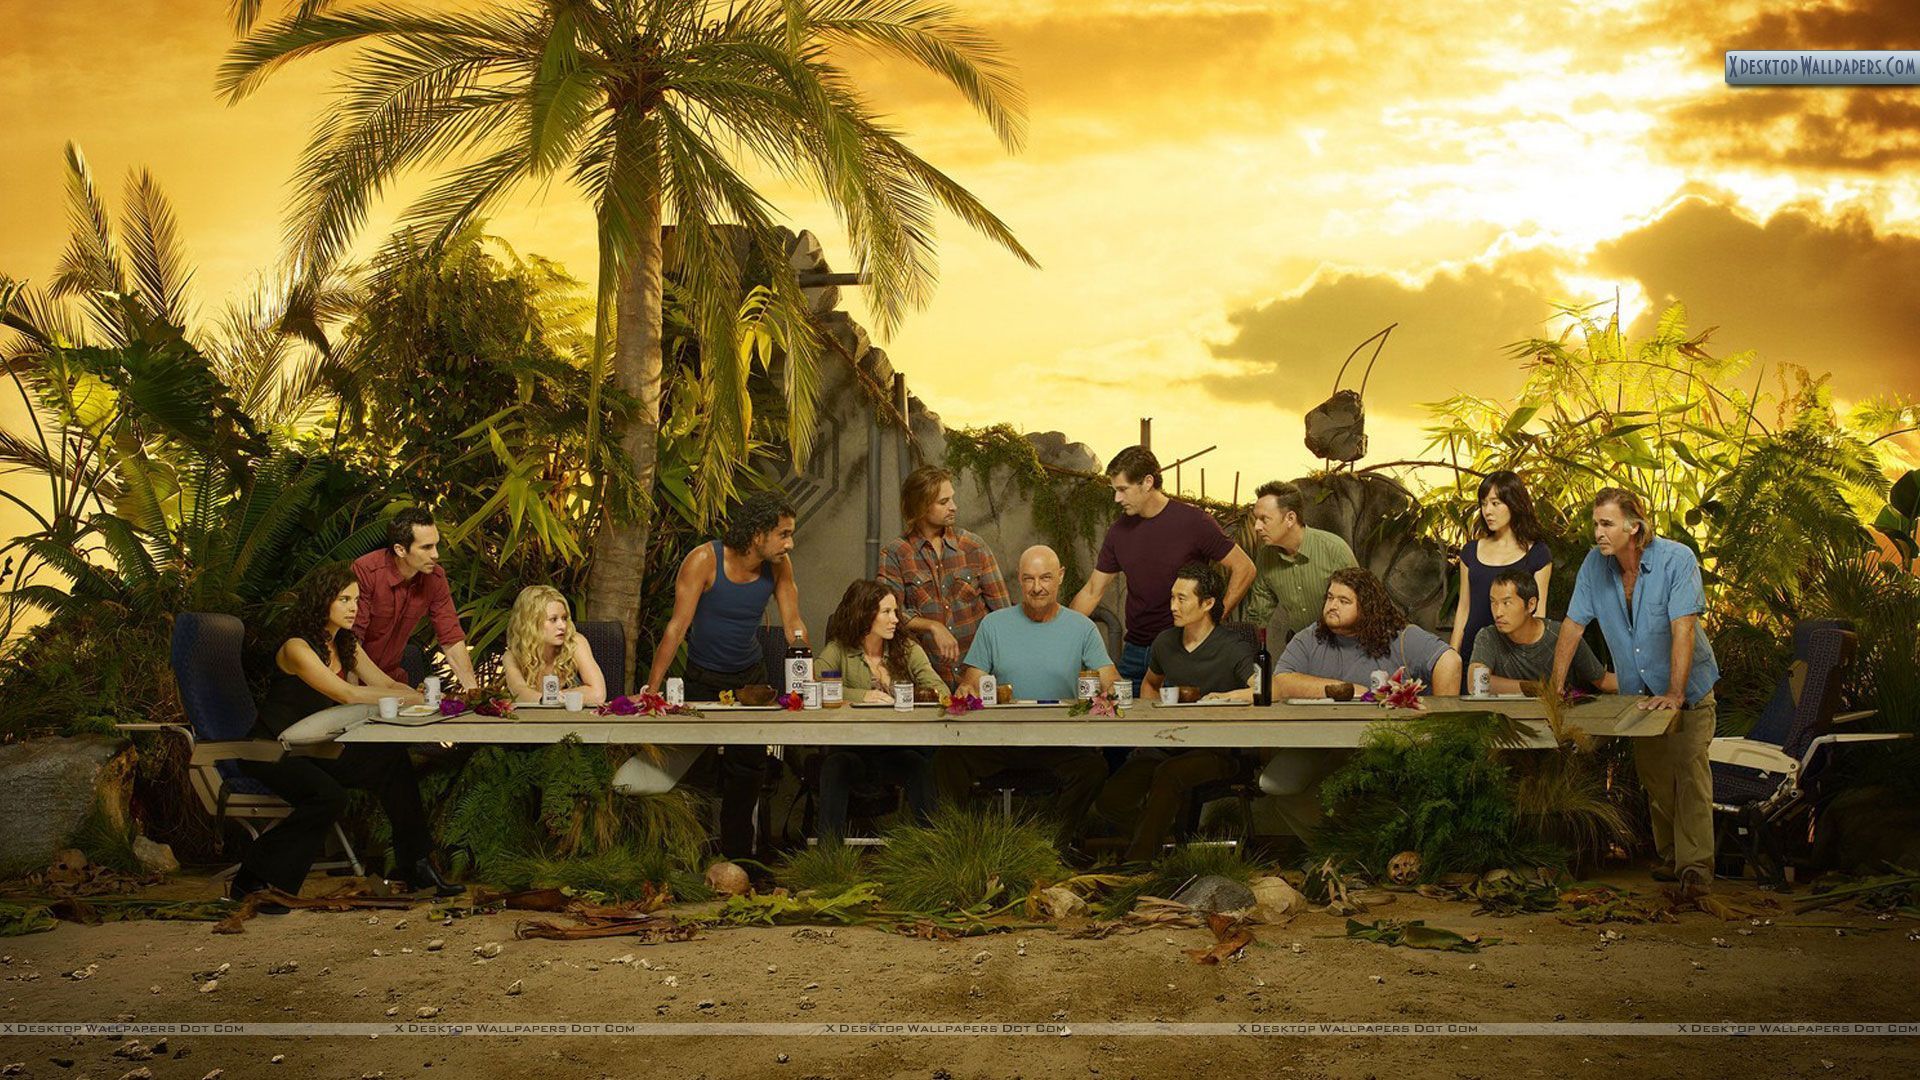 The 1st season of Lost was extraordinary television and changed the way networks (and actors) thought about how interesti. Lost tv show, Last supper, 11x17 poster